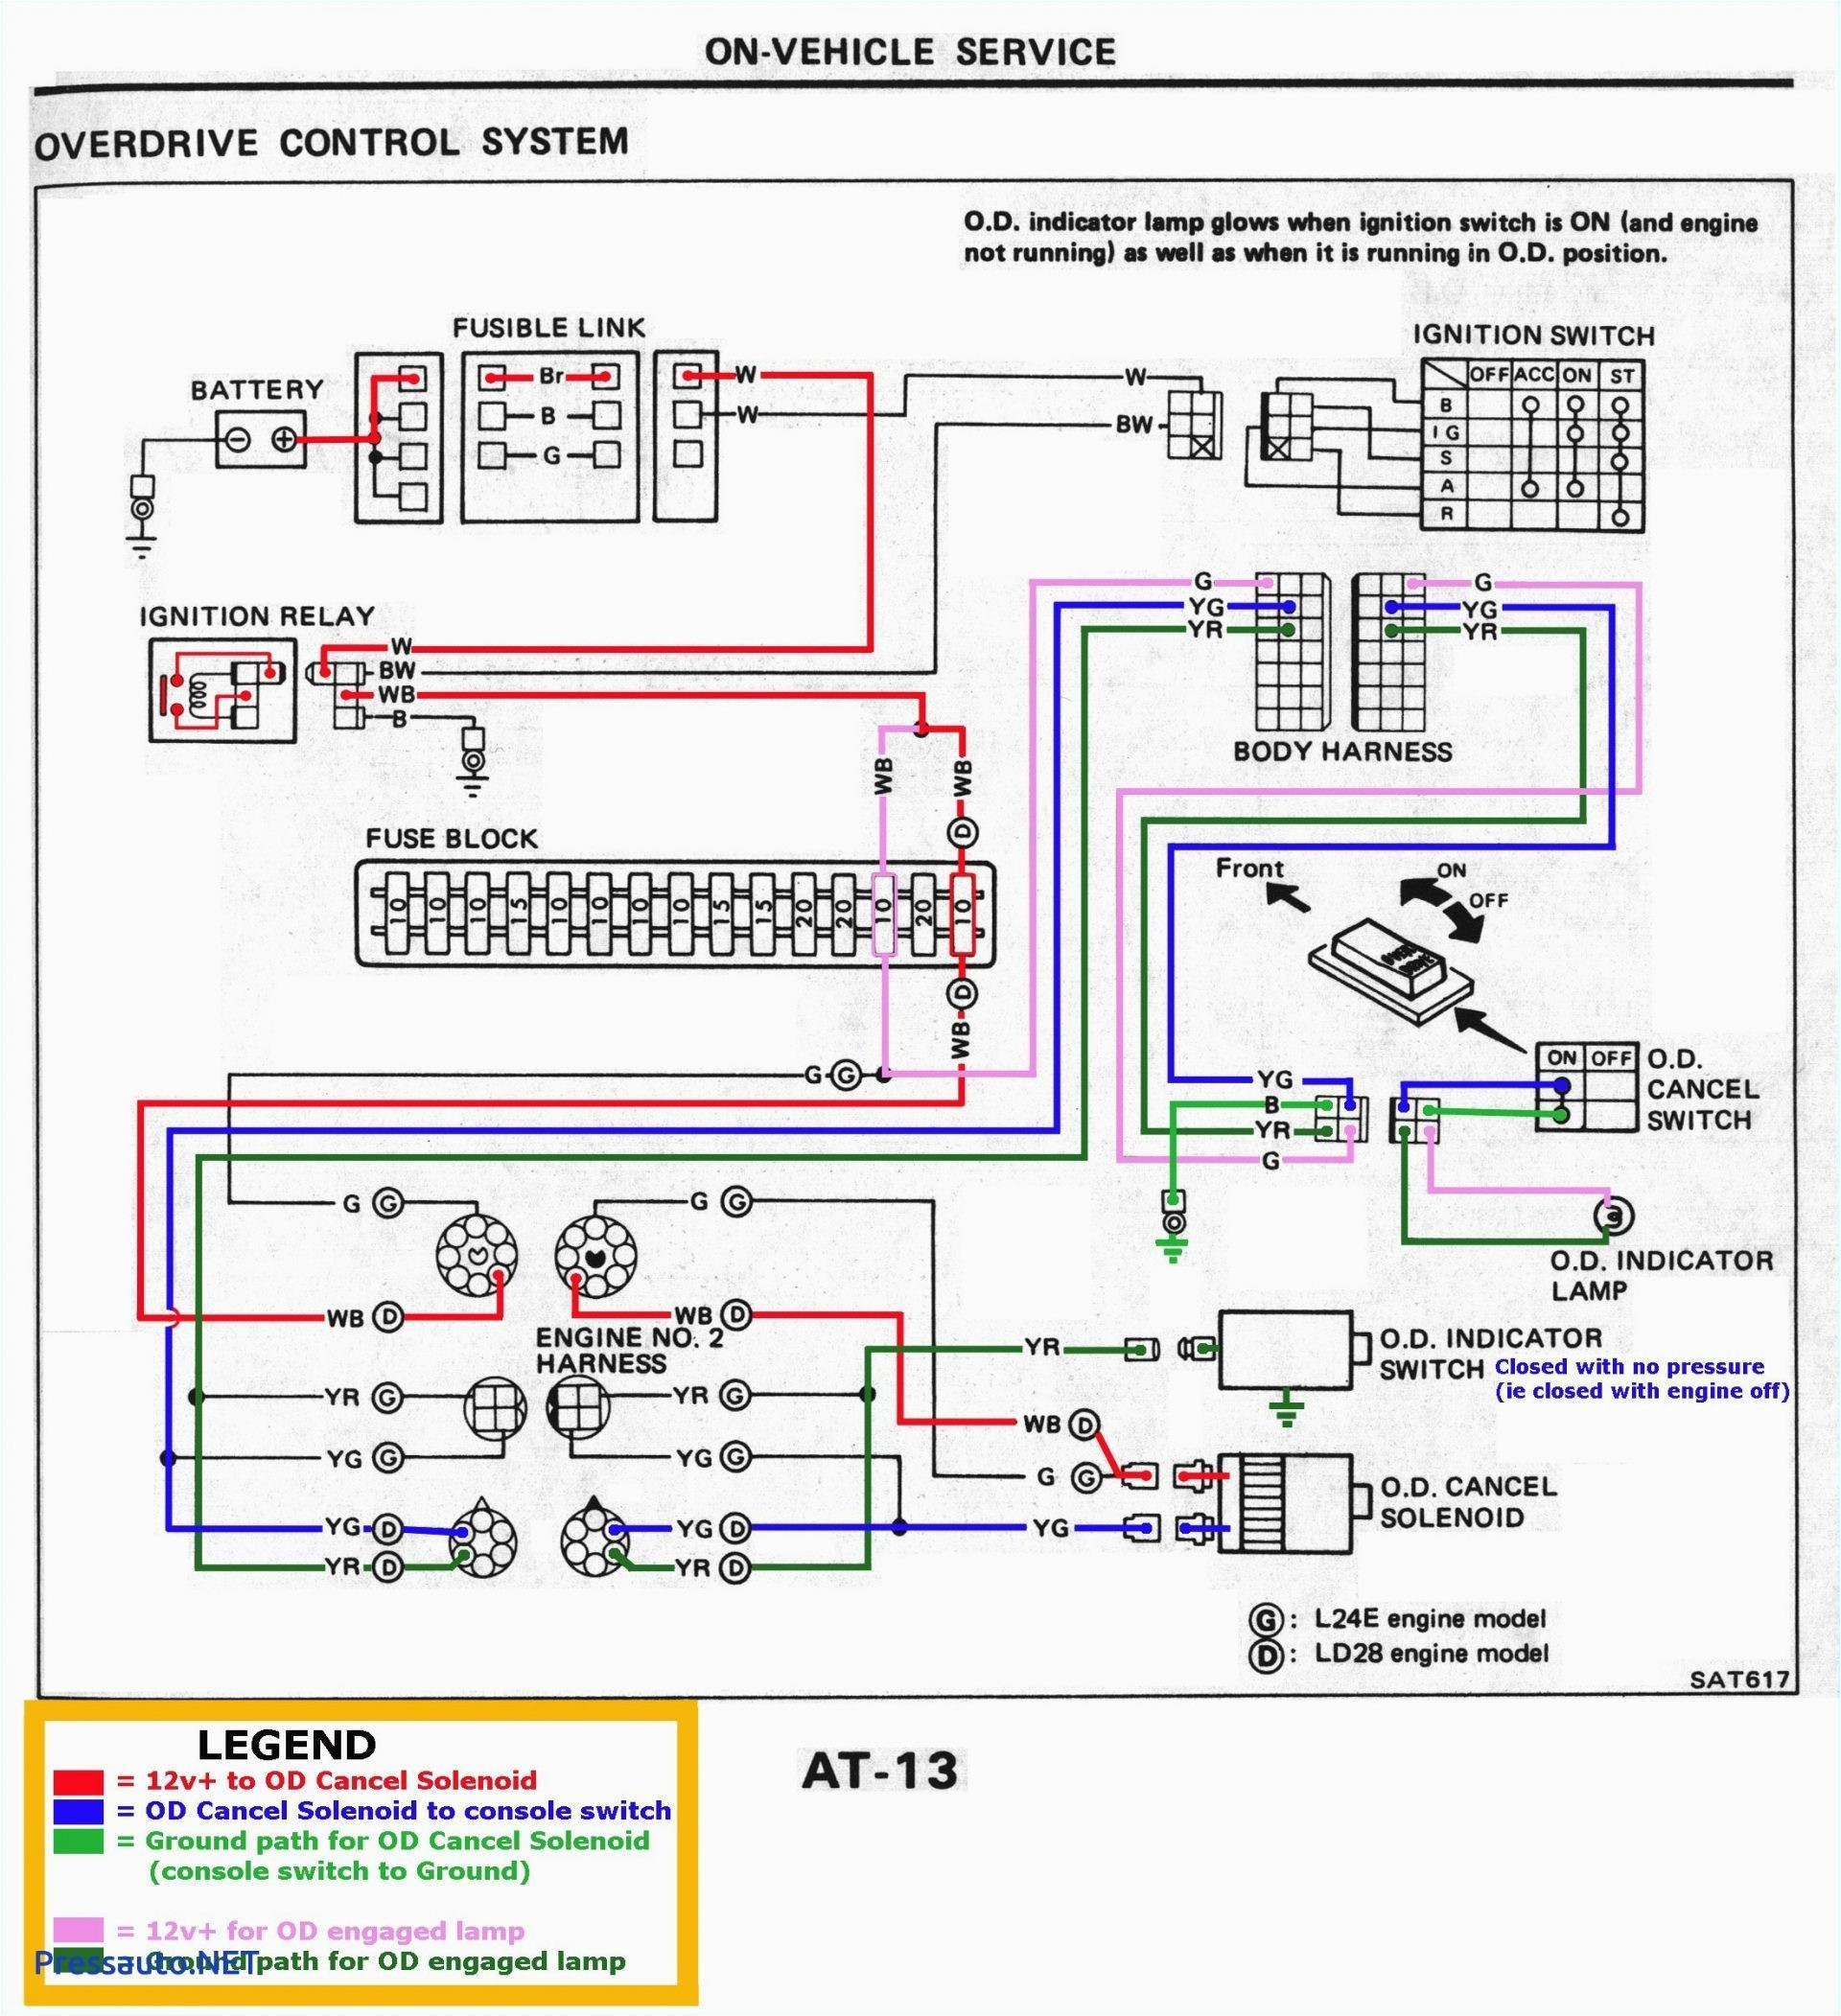 2001 ford F150 Wiring Diagram Wiring Diagrams C2 Ab Myrons Mopeds Wiring Diagram Files